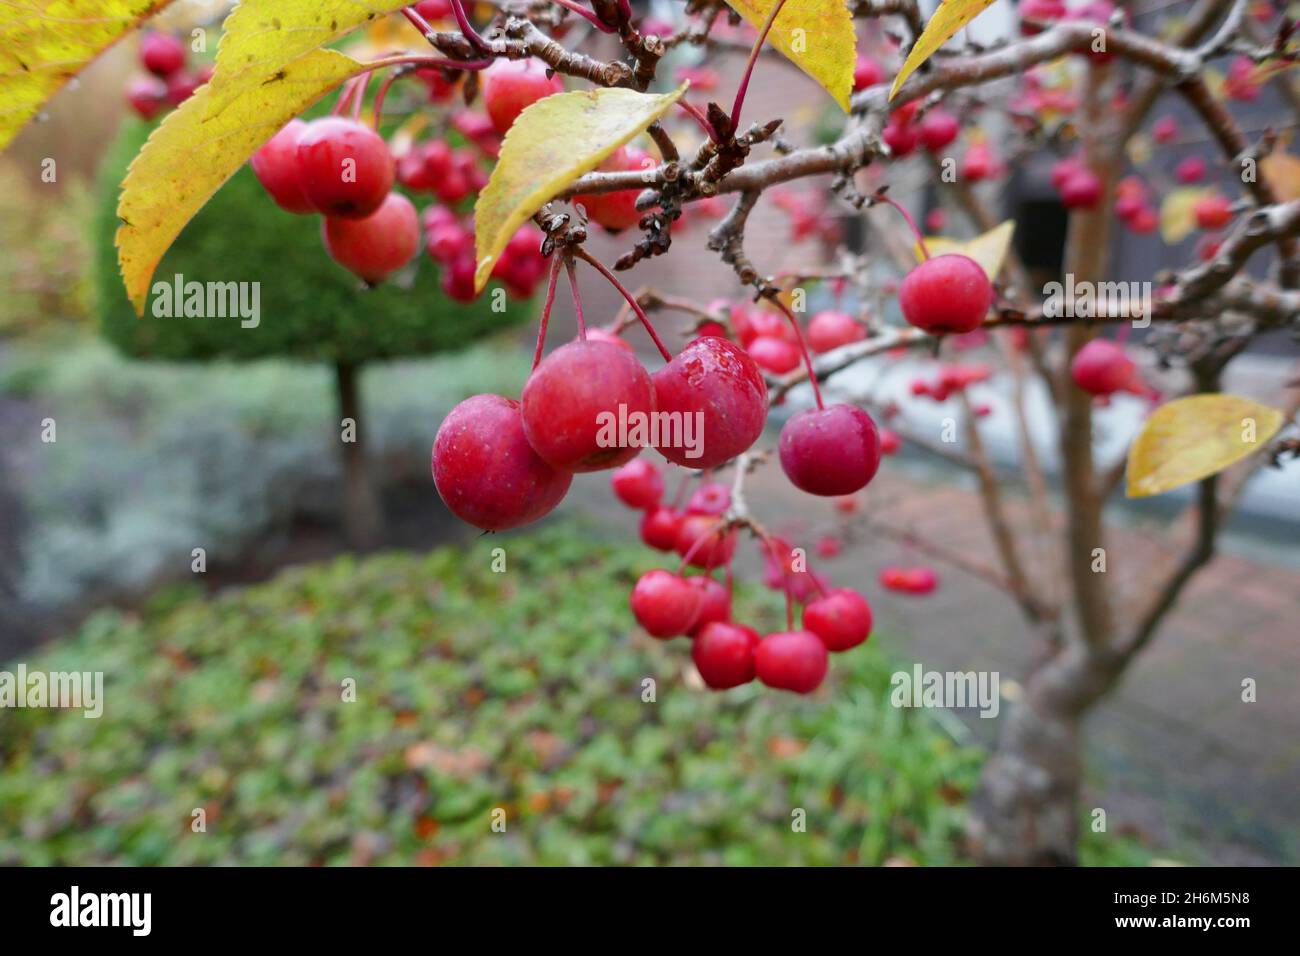 Mini ornamental apple tree. The apples are the size of cherries and the tree is smaller than 2 meters. A crab apple. Stock Photo